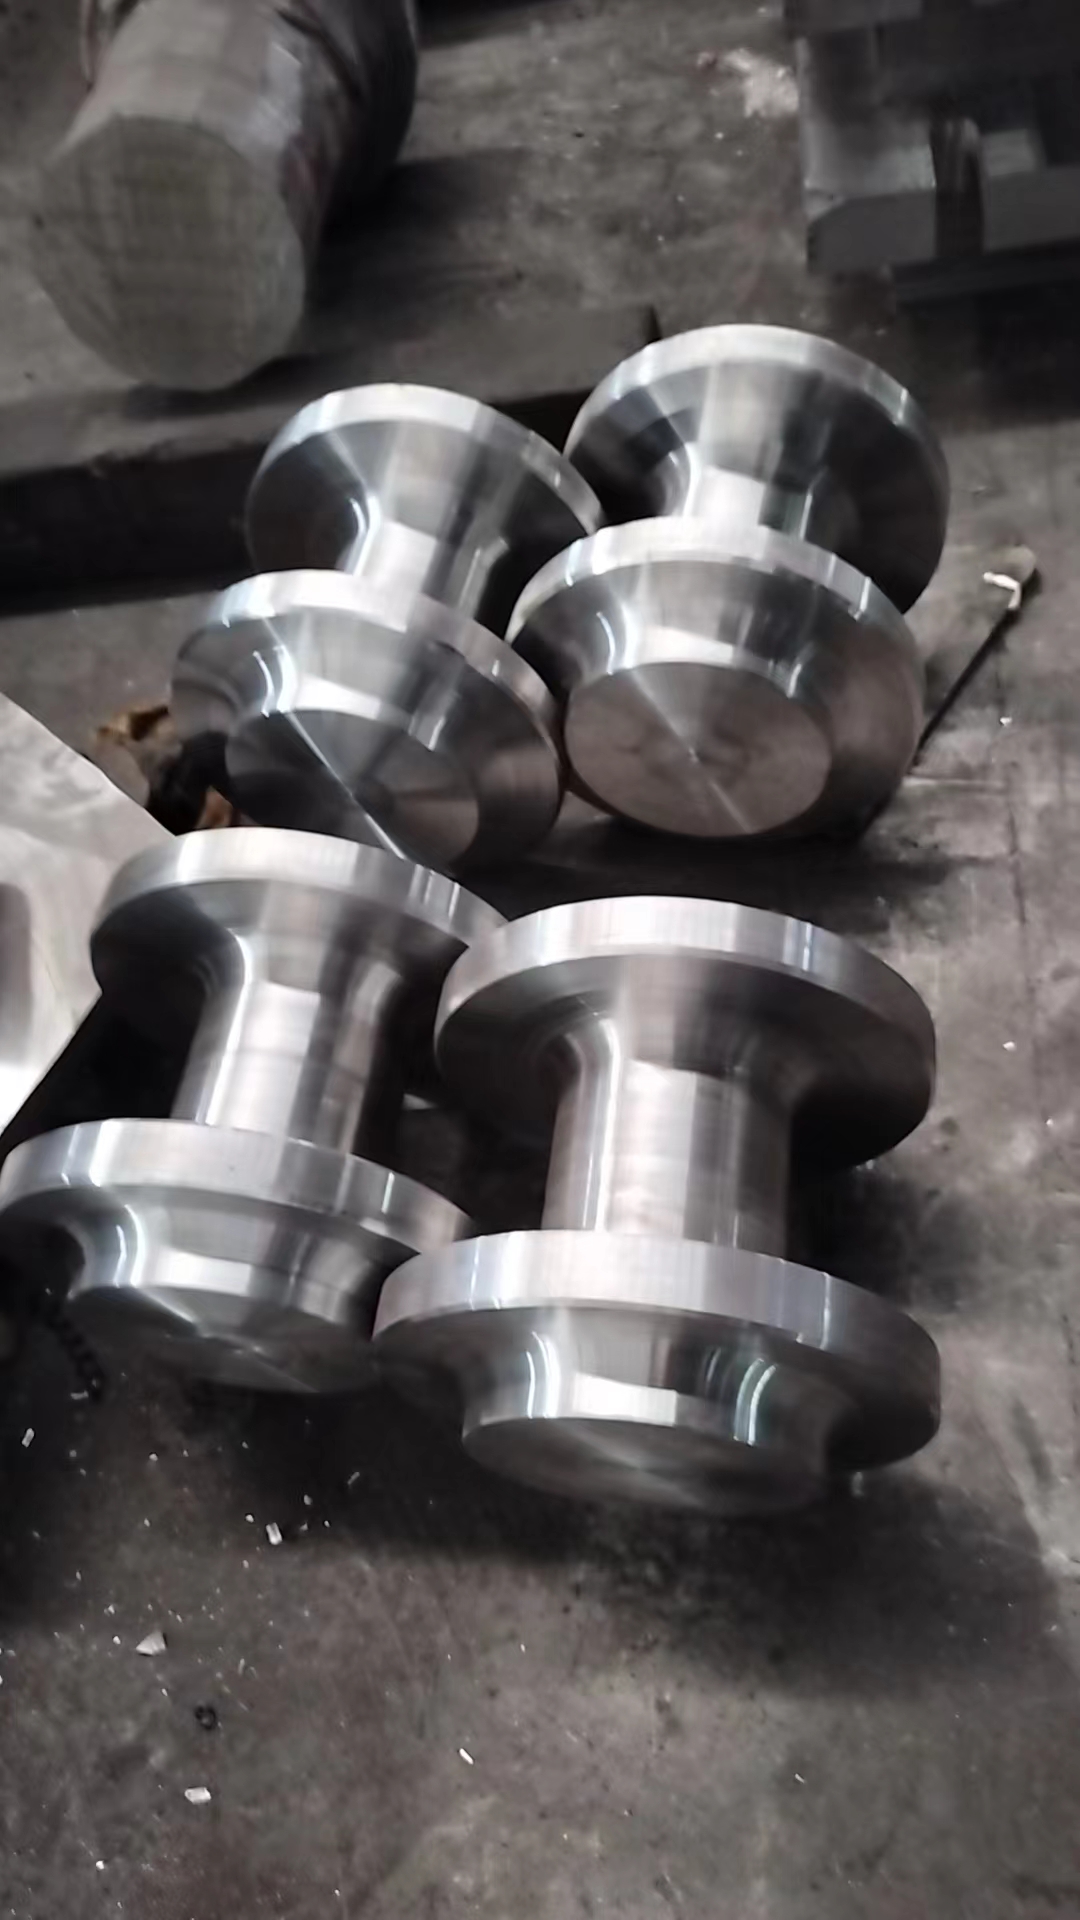 The way the forging process moves according to its modal